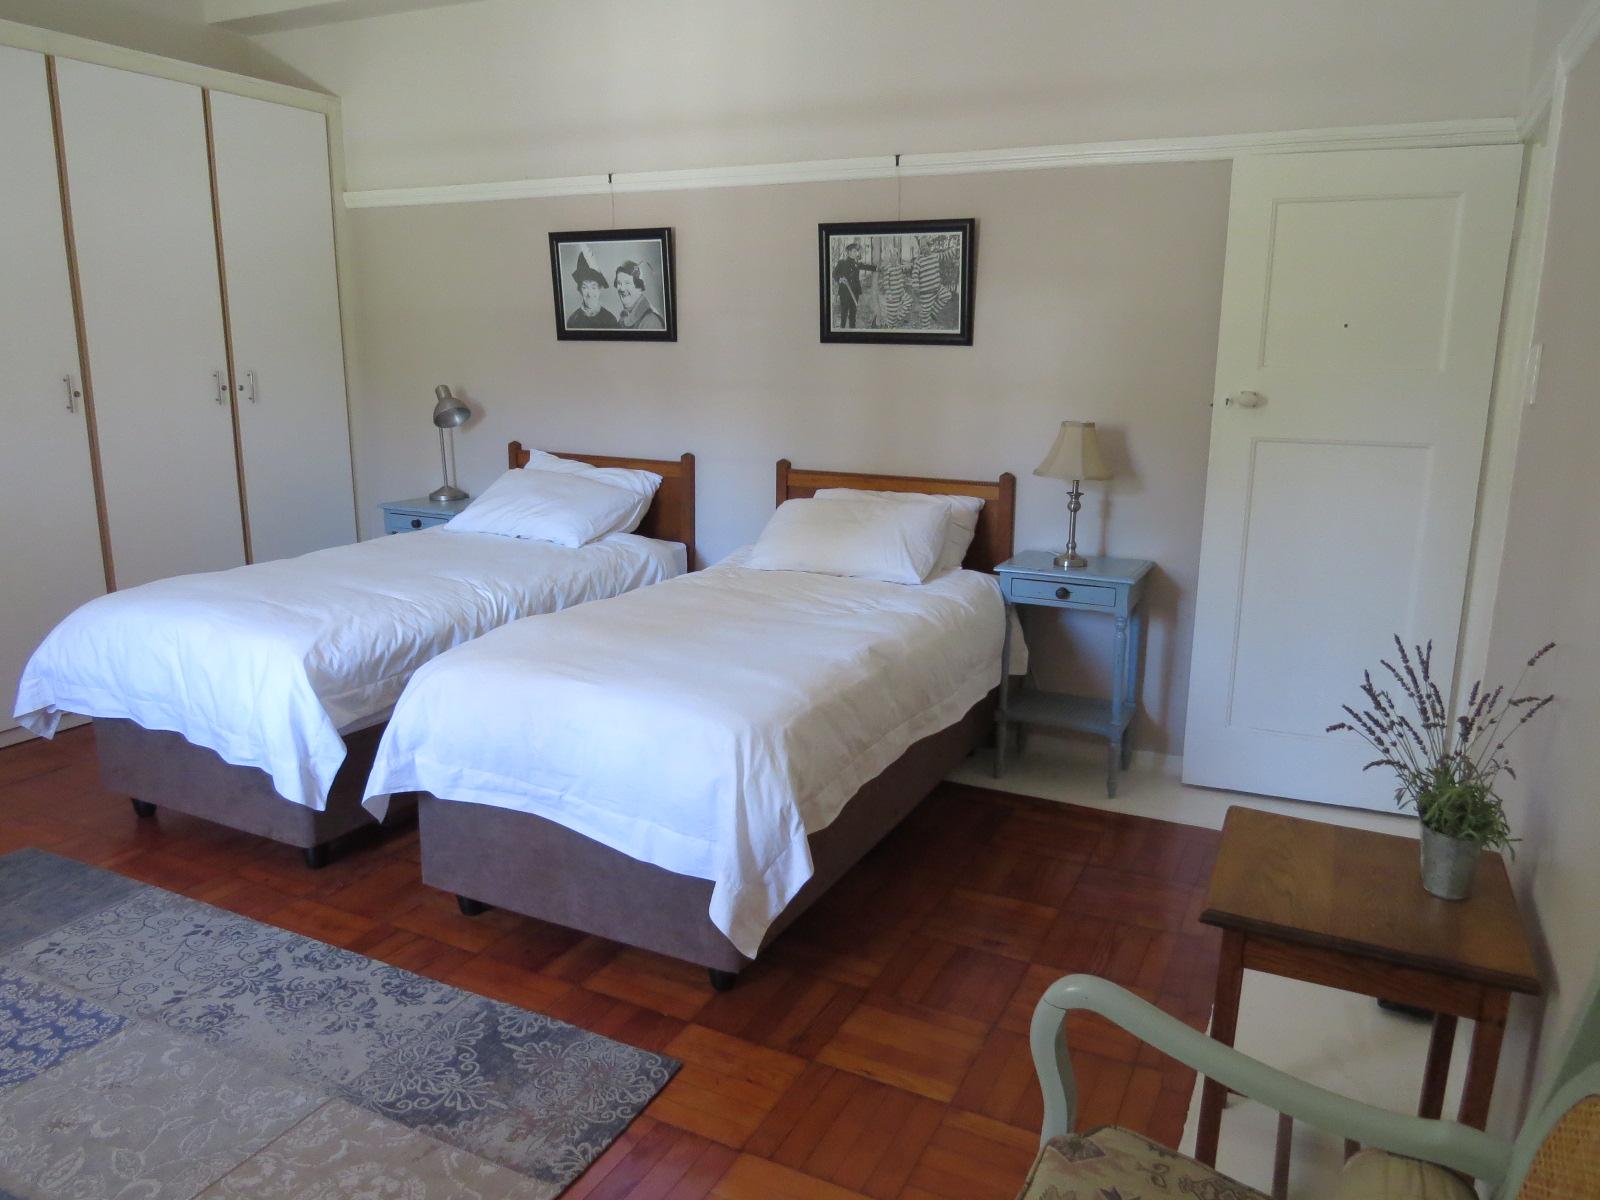 Photo 8 of Victoria Court accommodation in City Centre, Cape Town with 2 bedrooms and 1 bathrooms